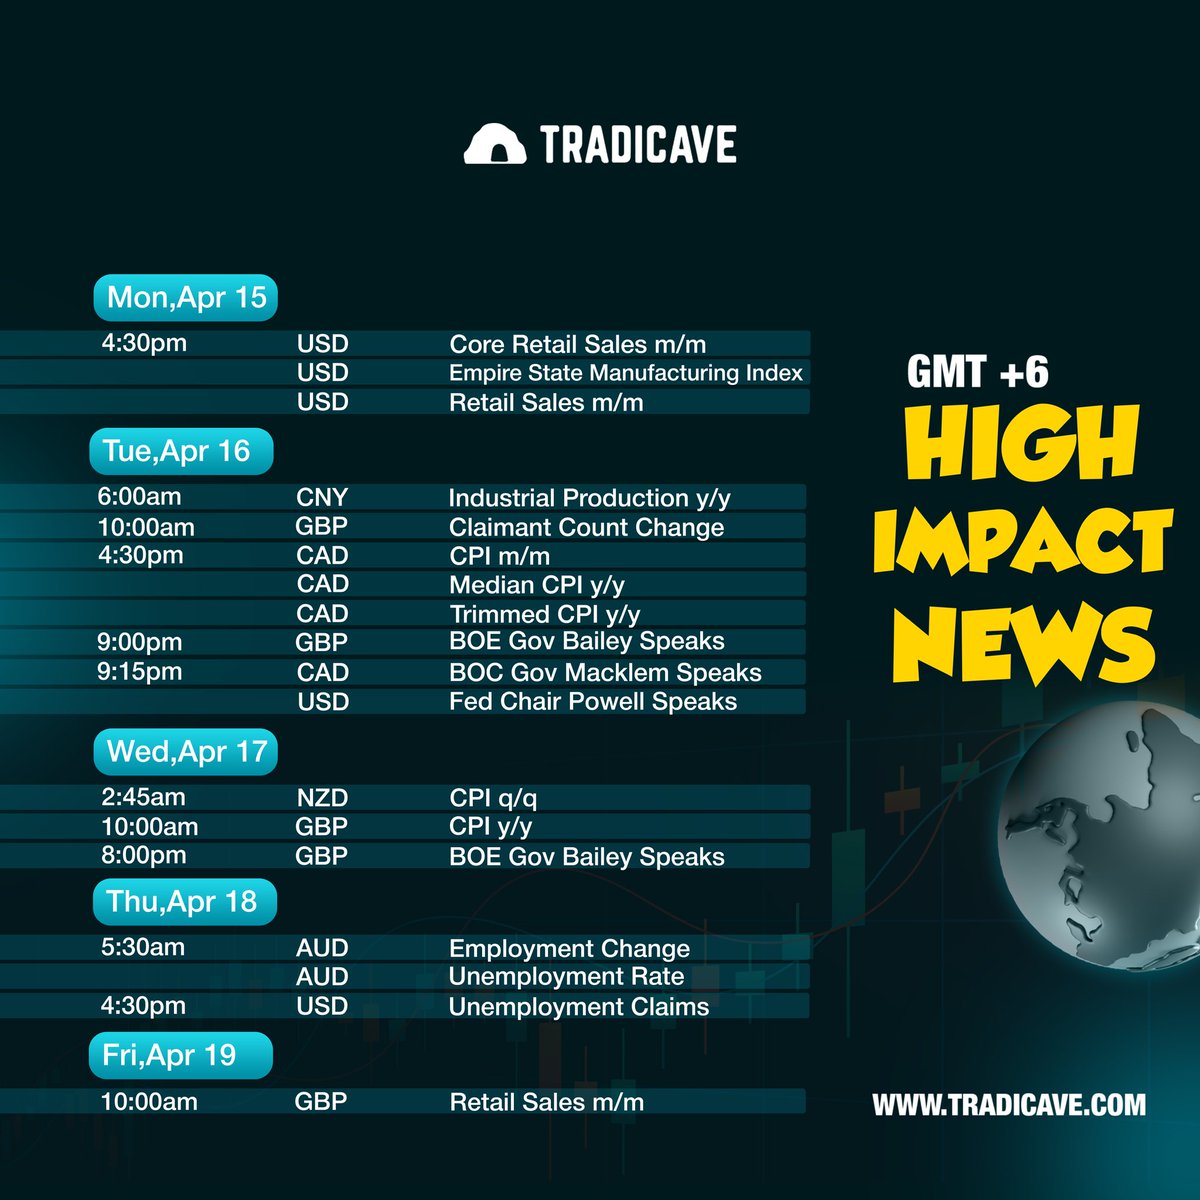 Attention Traders⚠️ Prepare for Market Momentum! Key Forex Events Unveiled: 15th April - 19th April. Enhance Your Strategy and Secure Your Advantage. Dive into Insights with Tradicave📈 Follow @Tradicave For more visit: tradicave.com #tradicave #propfirm #forexnews